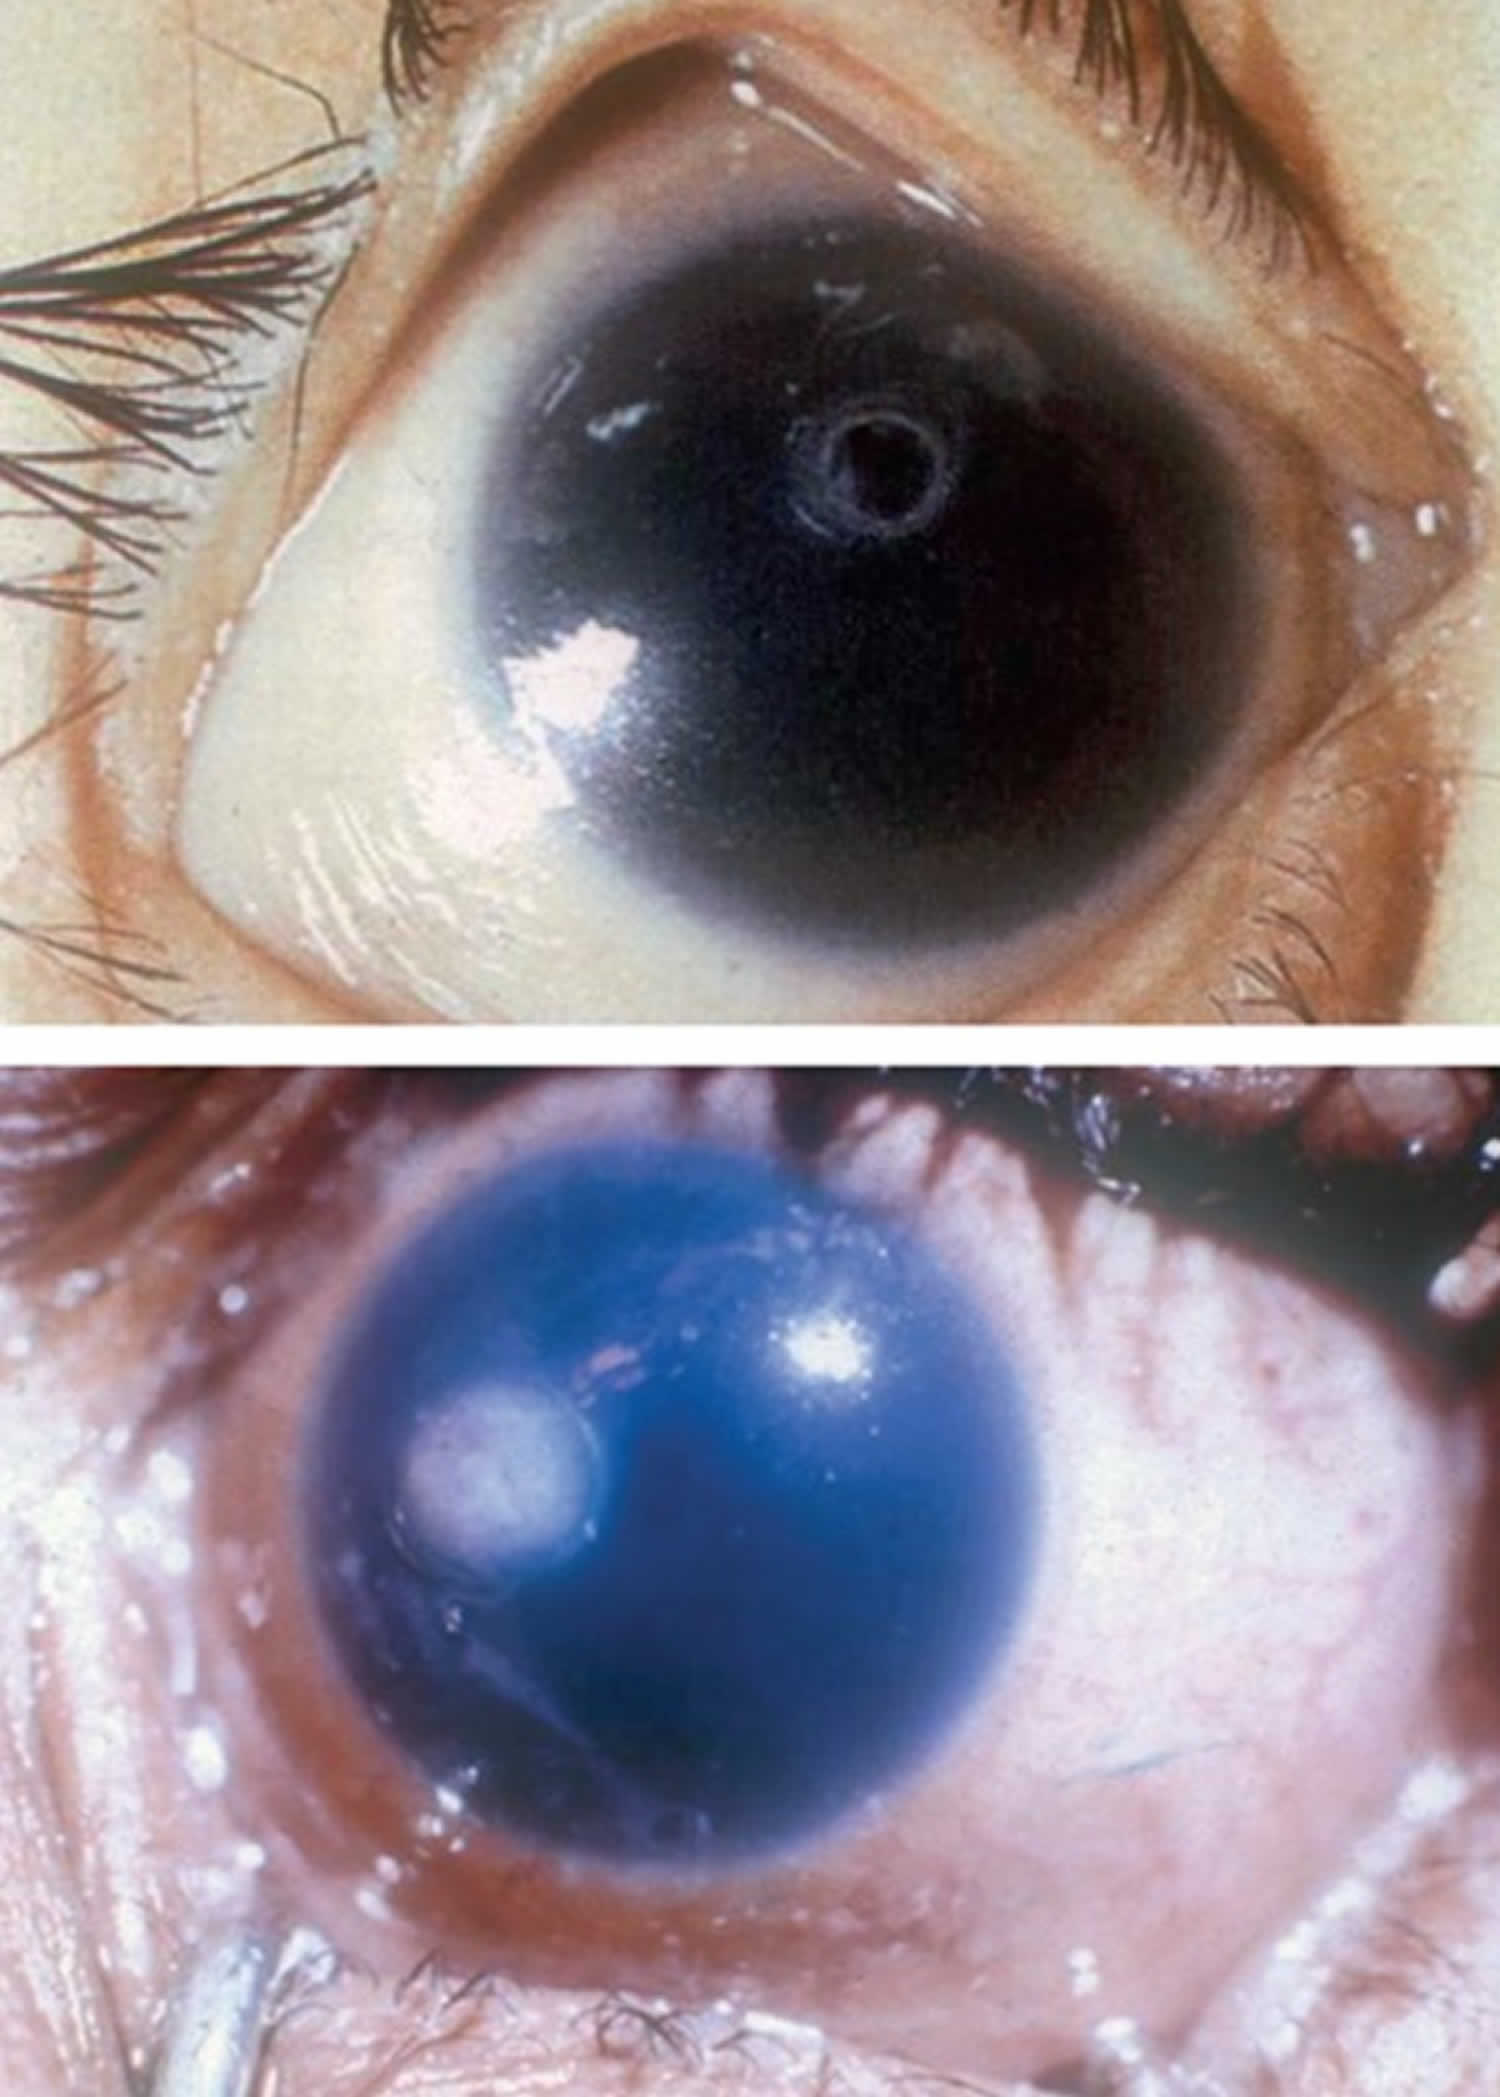 Corneal ulcer due to vitamin A deficiency